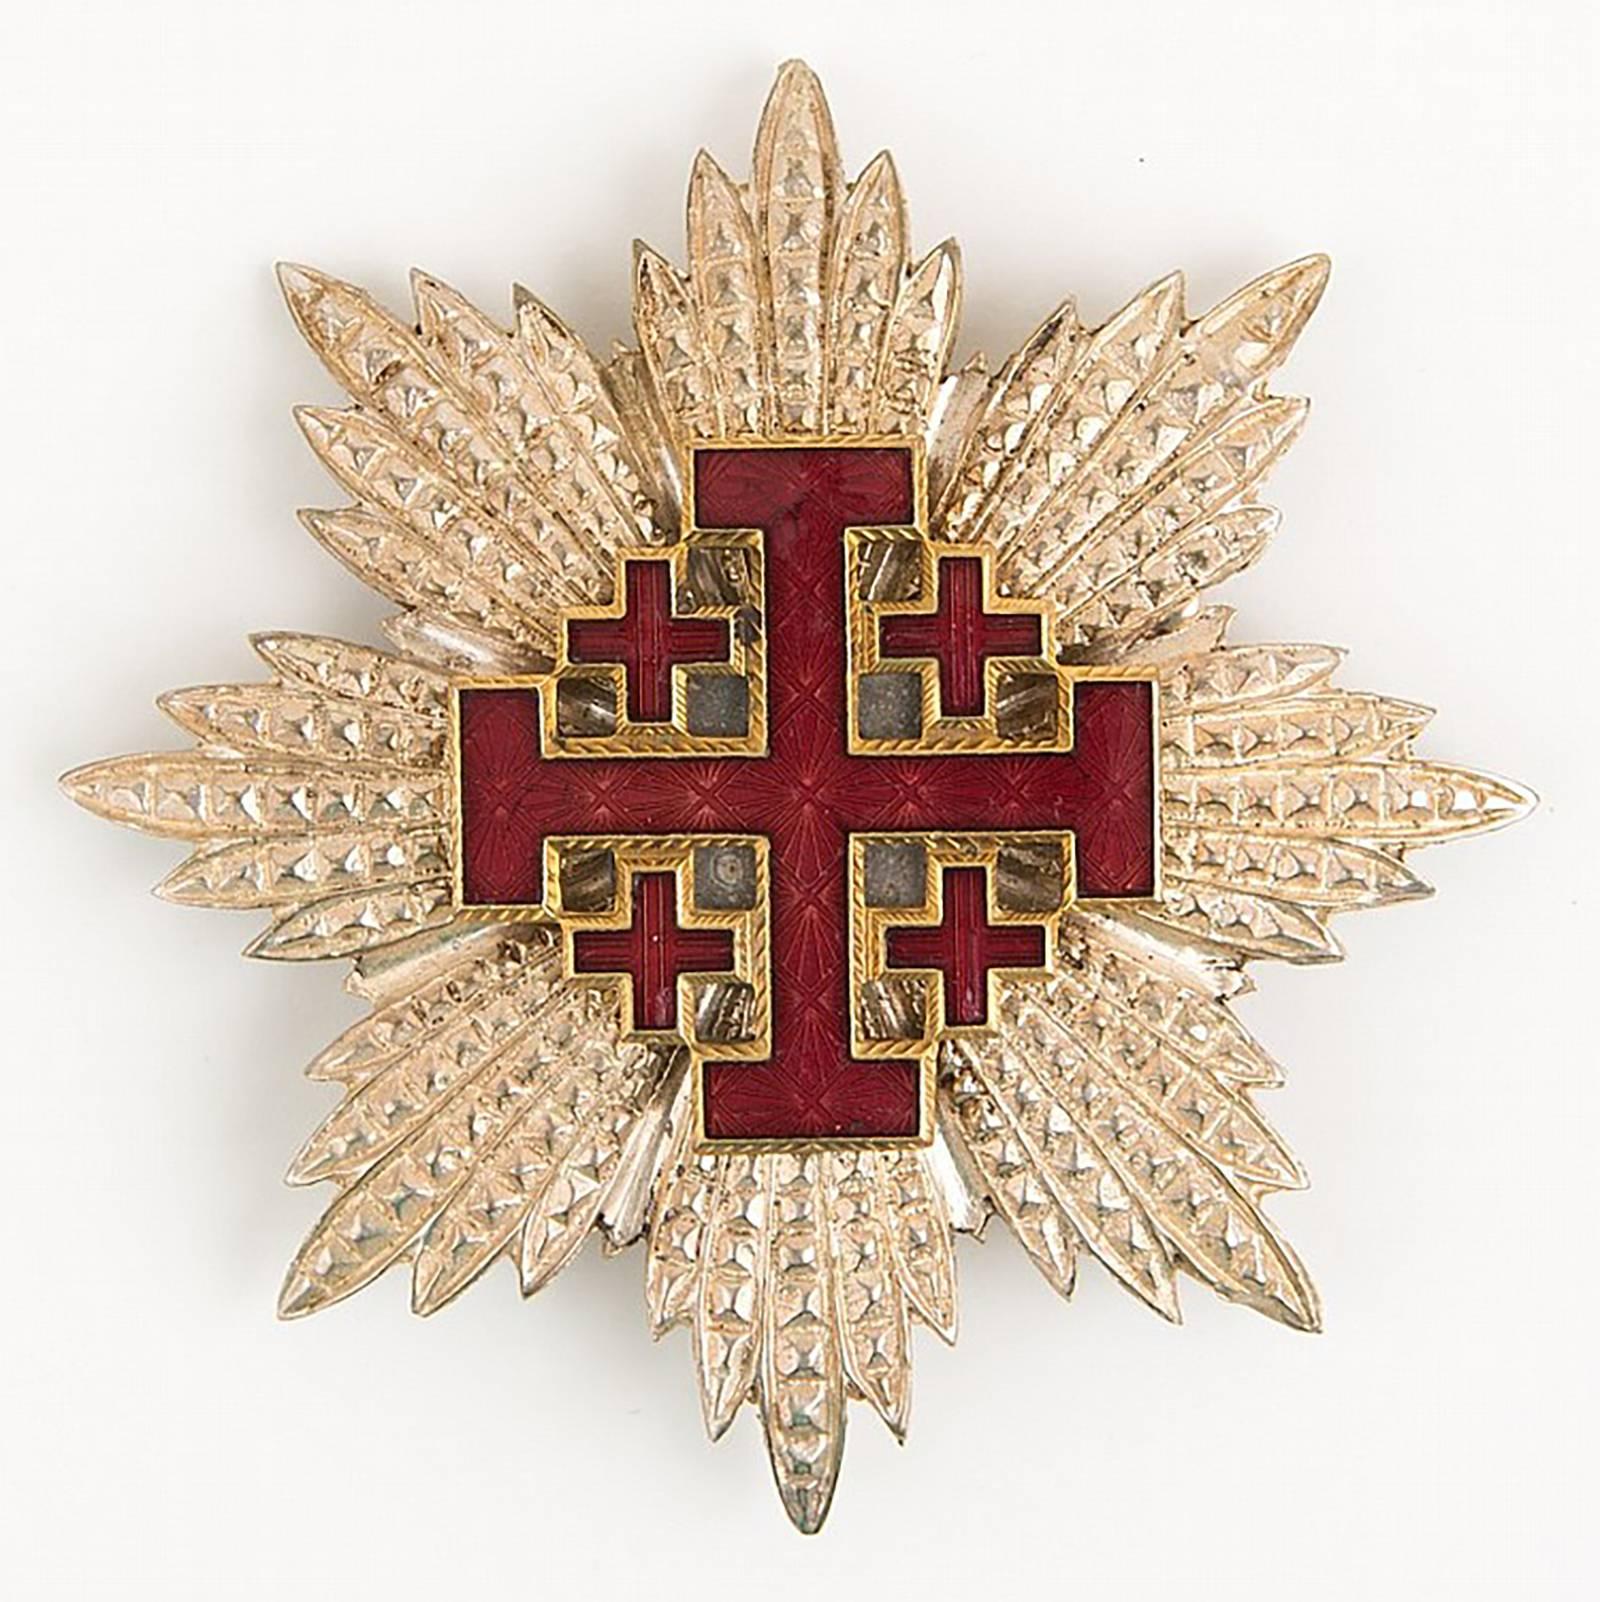 Rare Order of the Holy Sepulcher of Jerusalem Knight Grand Cross Badge - Mixed Media Art by Unknown